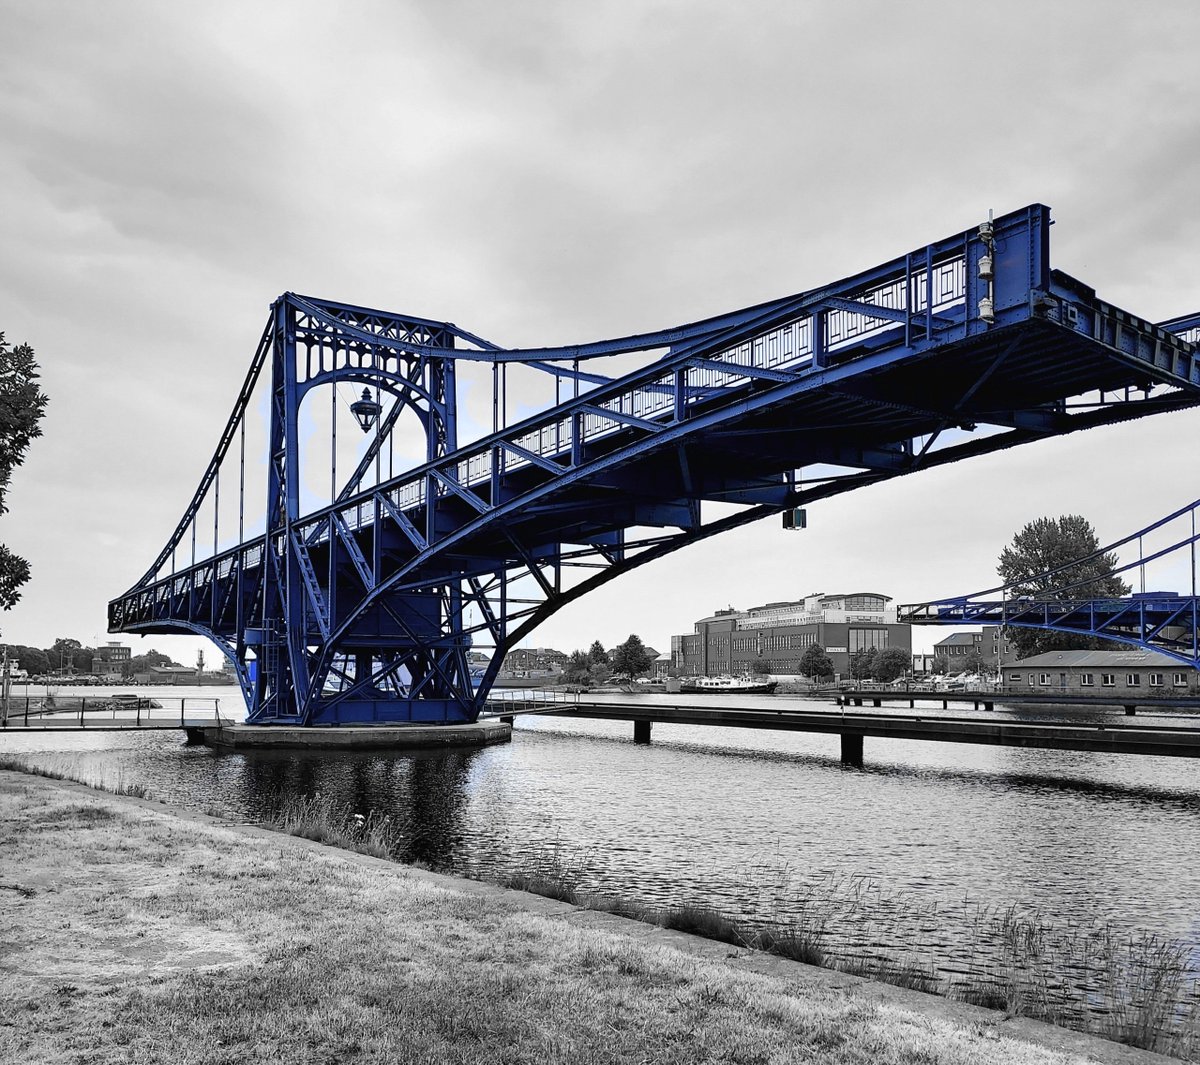 QP a photo with selective colour
Kaiser-Wilhelm-Brücke in Wilhelmshaven/Germany